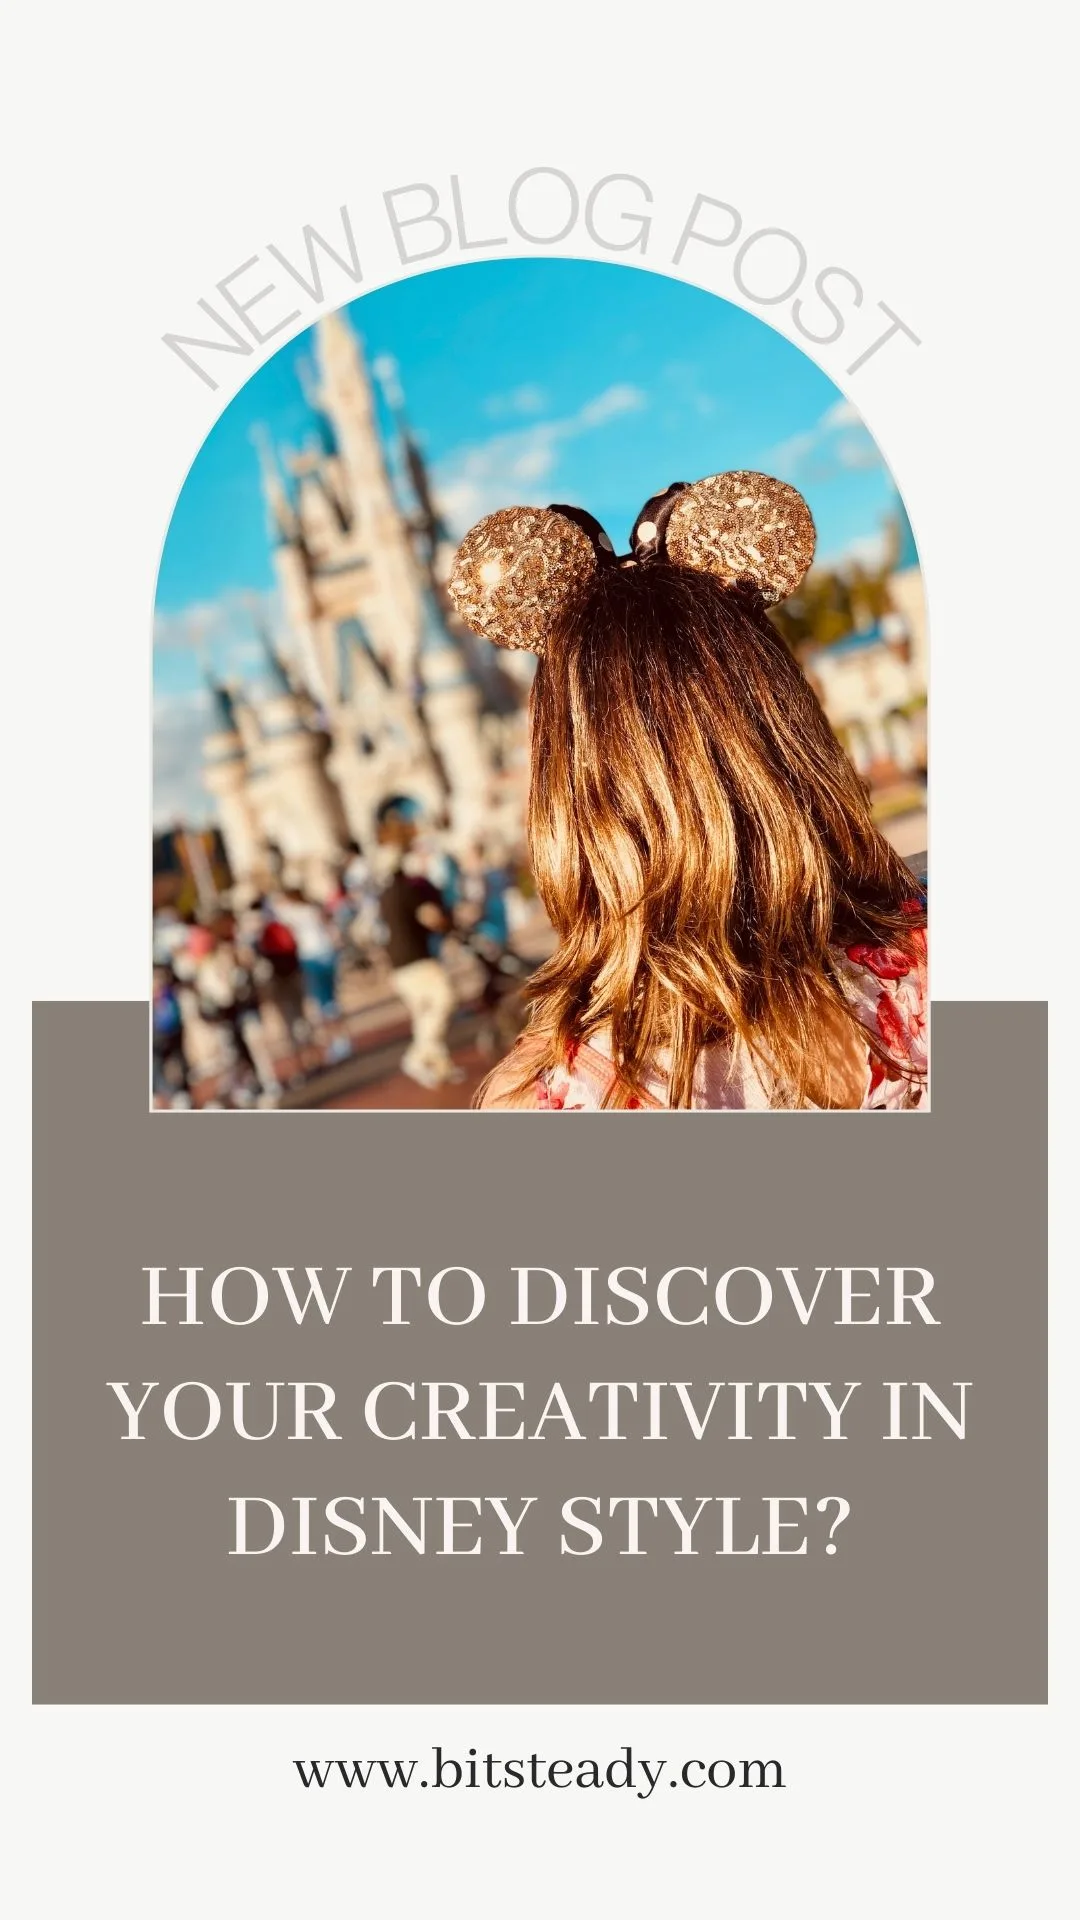  little role-play to discover your creativity in Disney style